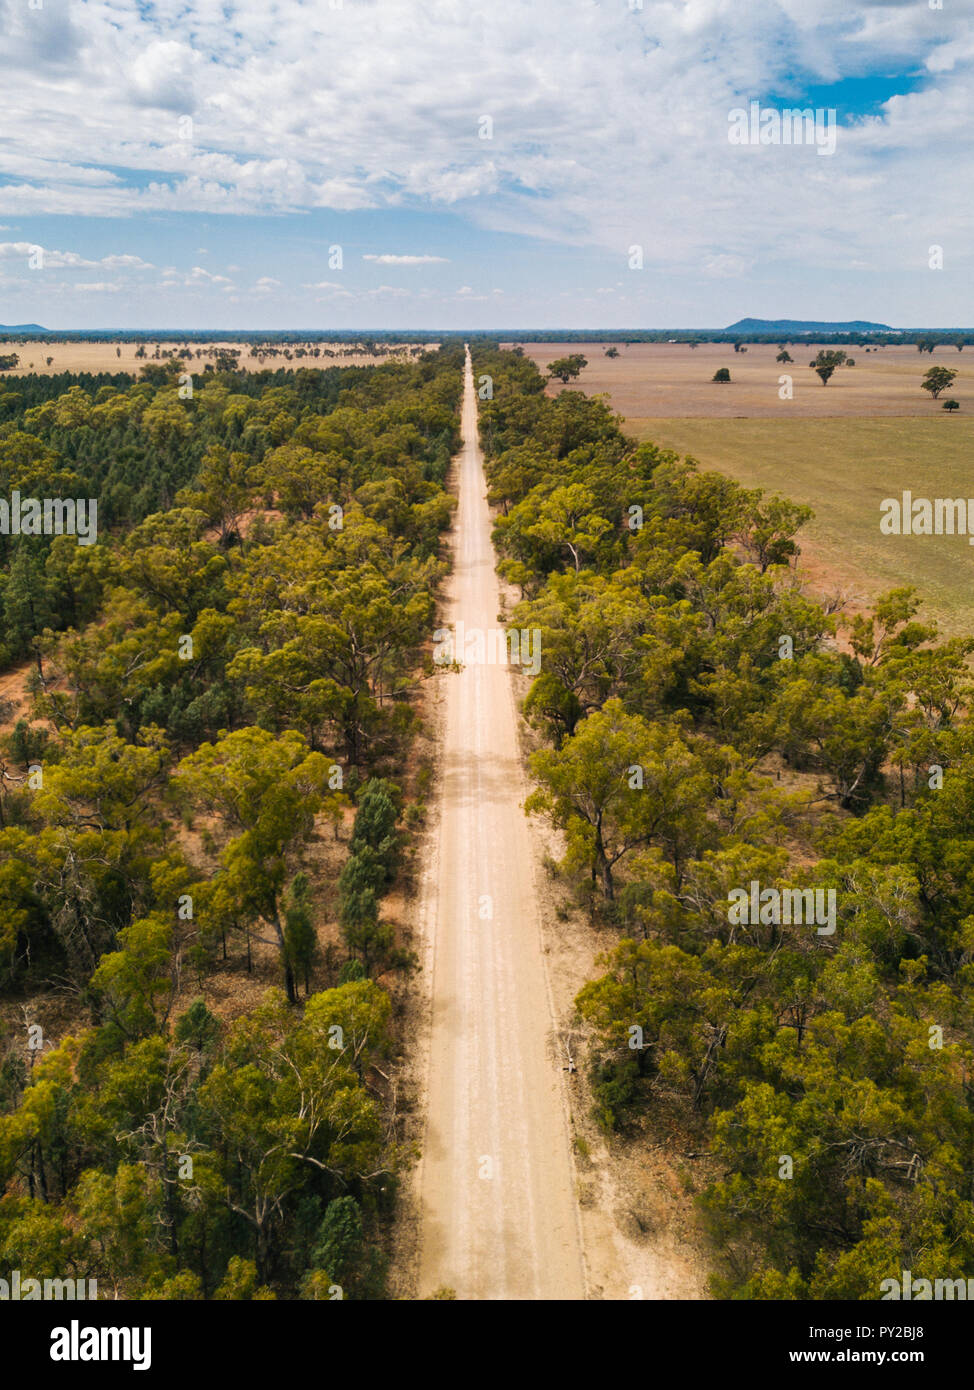 Aerial Image of a Dirt Road in the Australian Outback Stock Photo